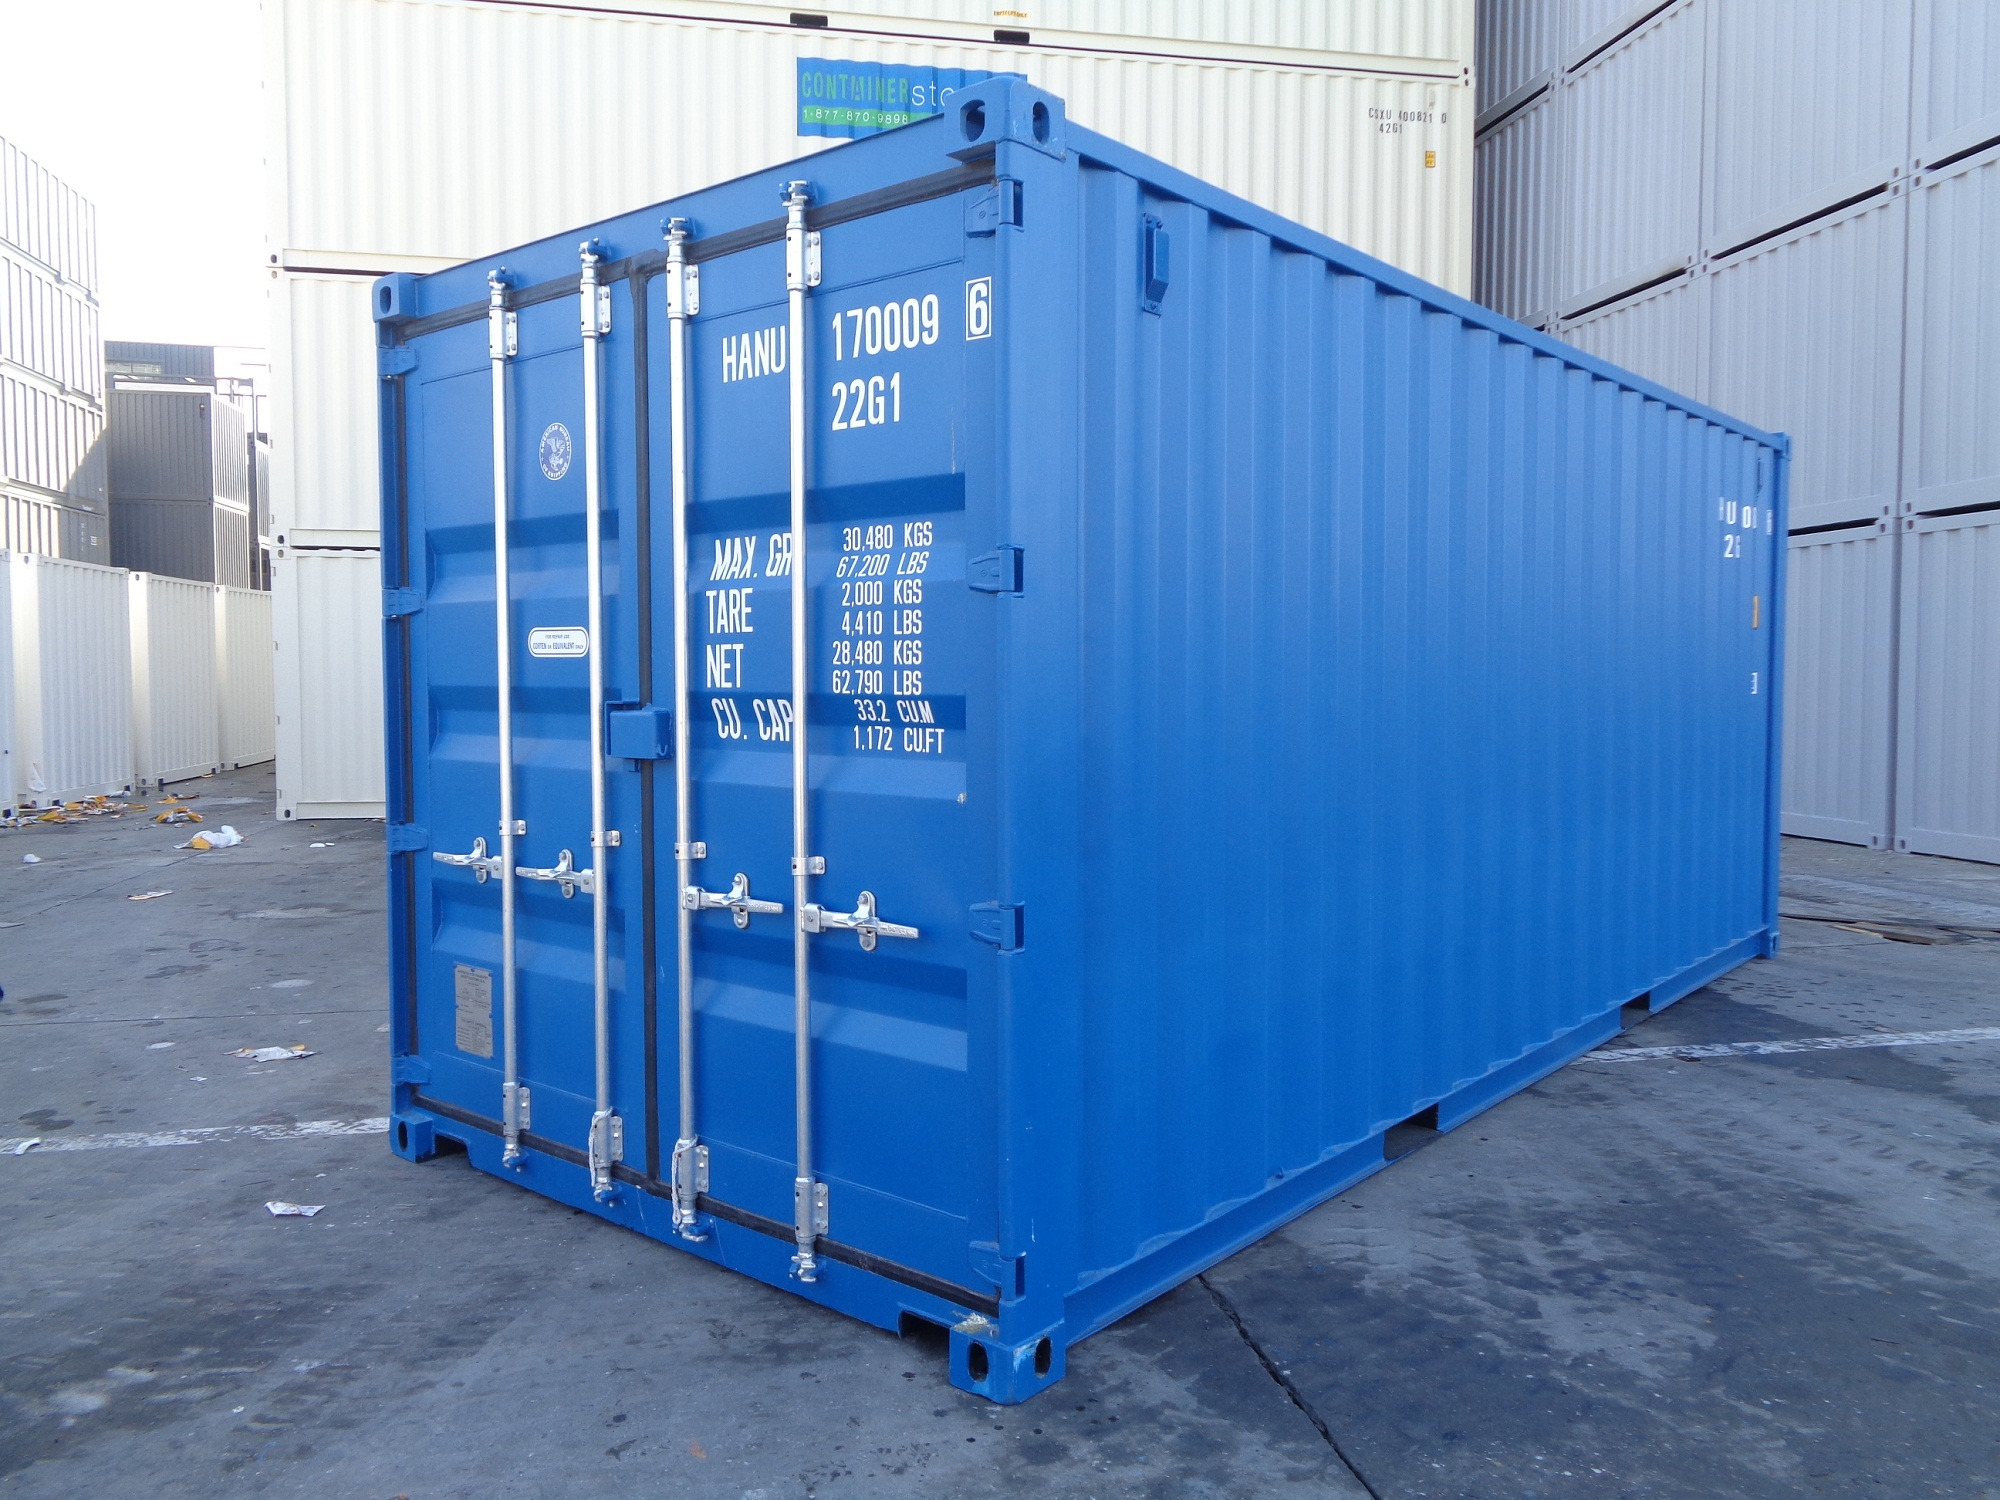 HCT Hansa Container Trading GmbH undefined: photos 4